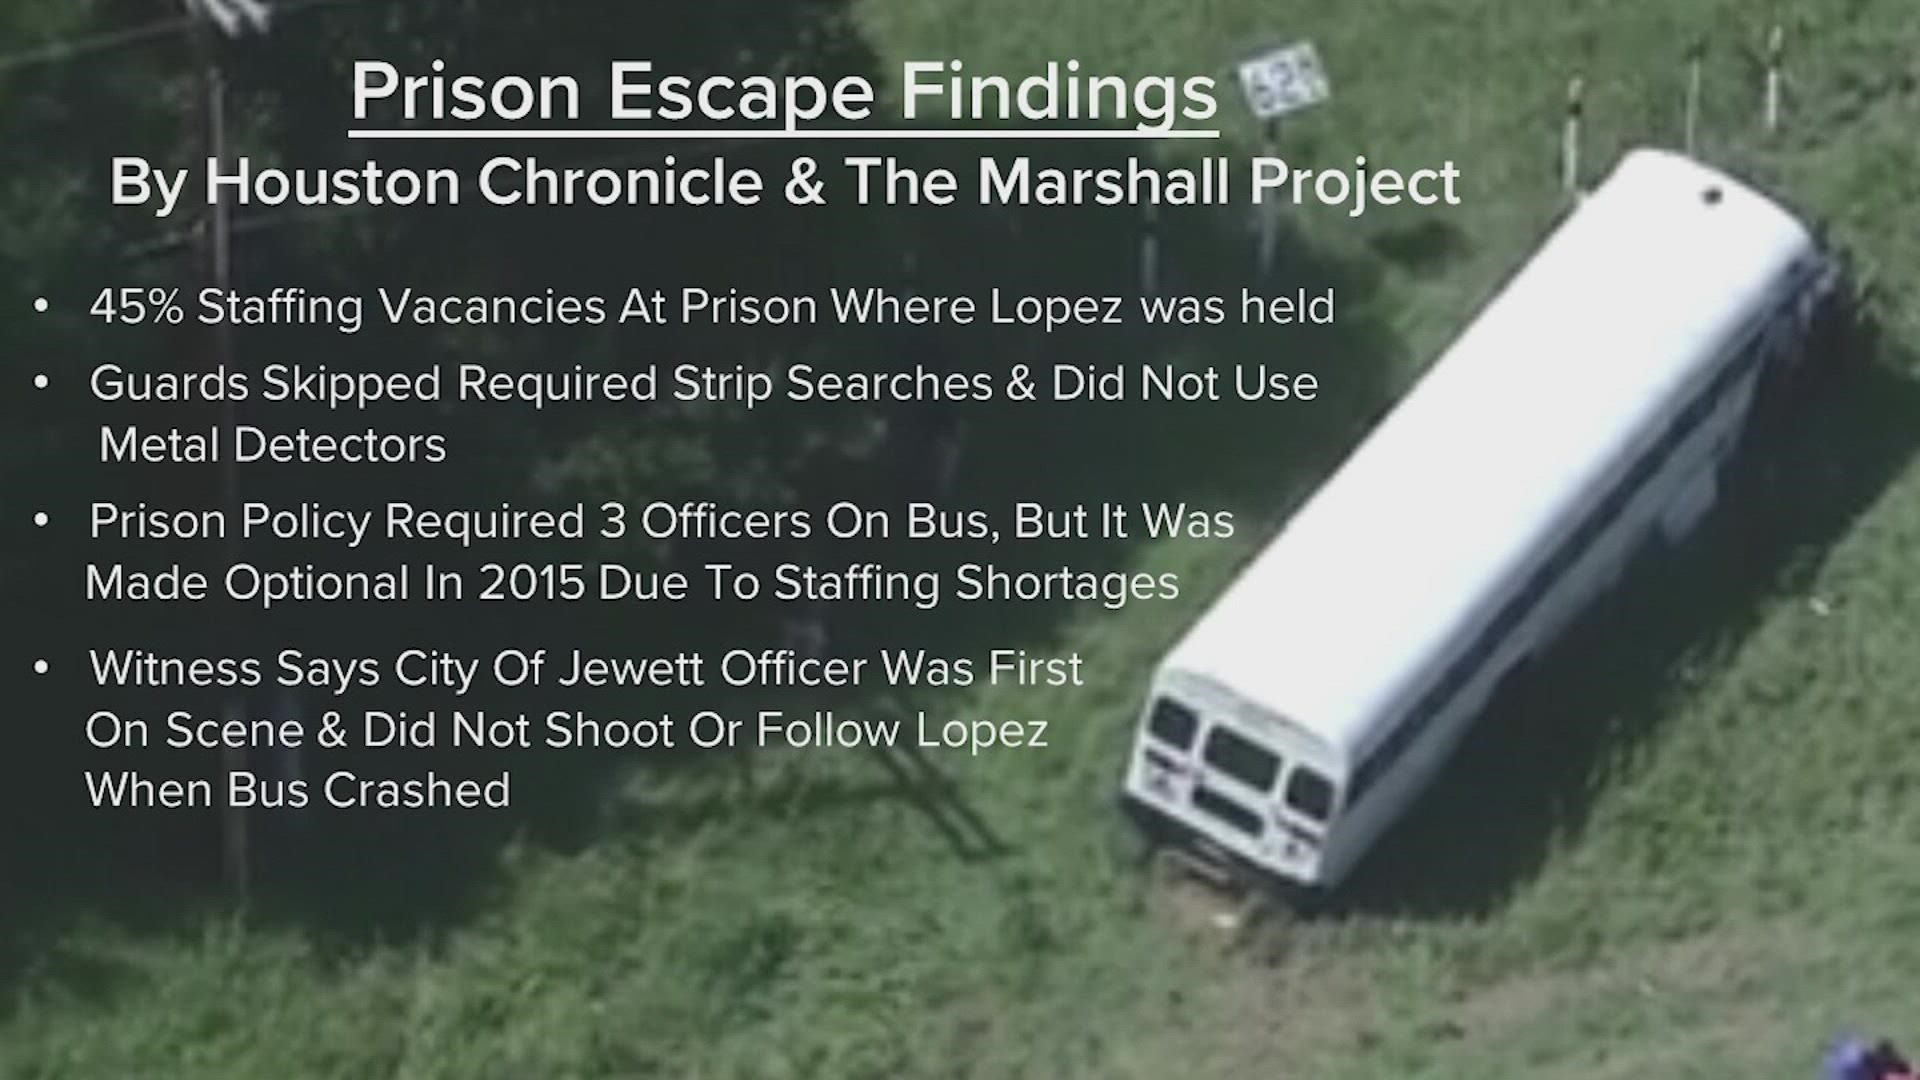 An investigation led by The Marshall Report and Houston Chronicle shows several security failures leading up to Gonzalo Lopez's prison bus escape earlier this year.